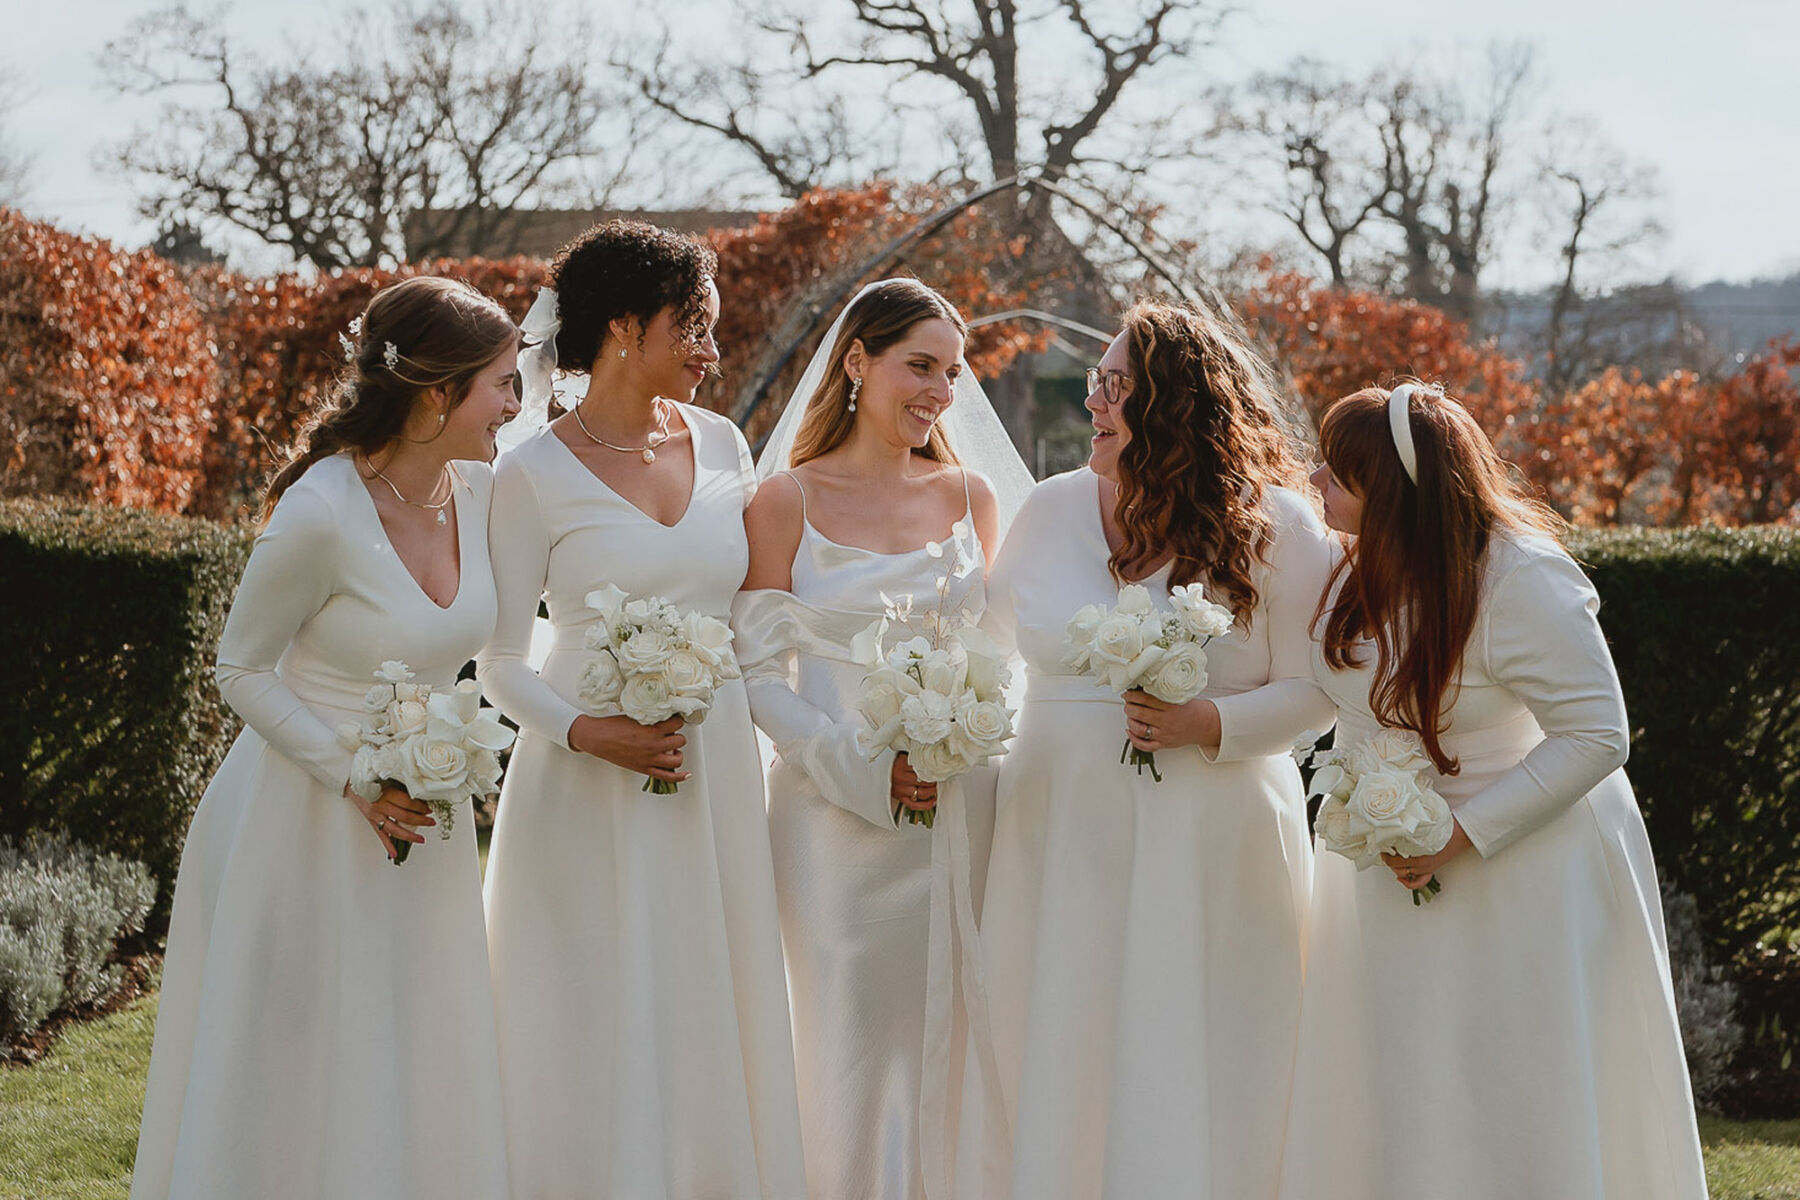 Bride in Newhite wedding dress. Bridesmaids in all white dresses from Coast.